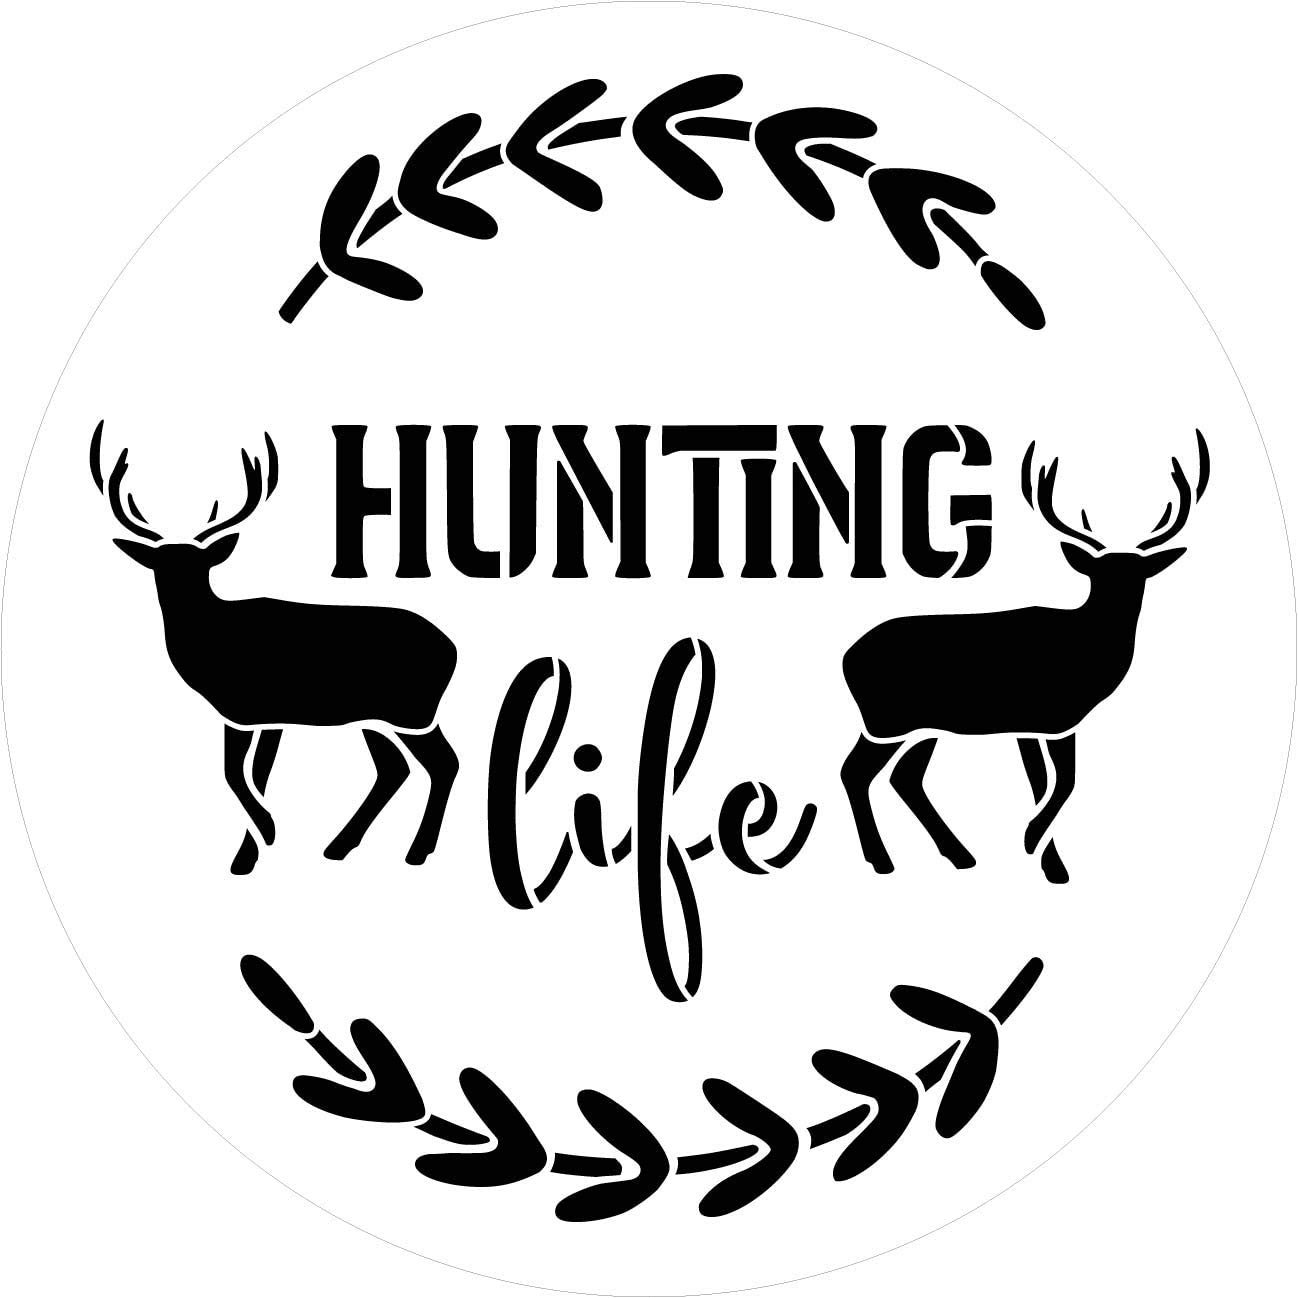 Hunting Life Stencil by StudioR12 | DIY Deer Laurel Wreath Home Decor Gift | Craft & Paint Round Wood Sign | Reusable Mylar Template | Select Size